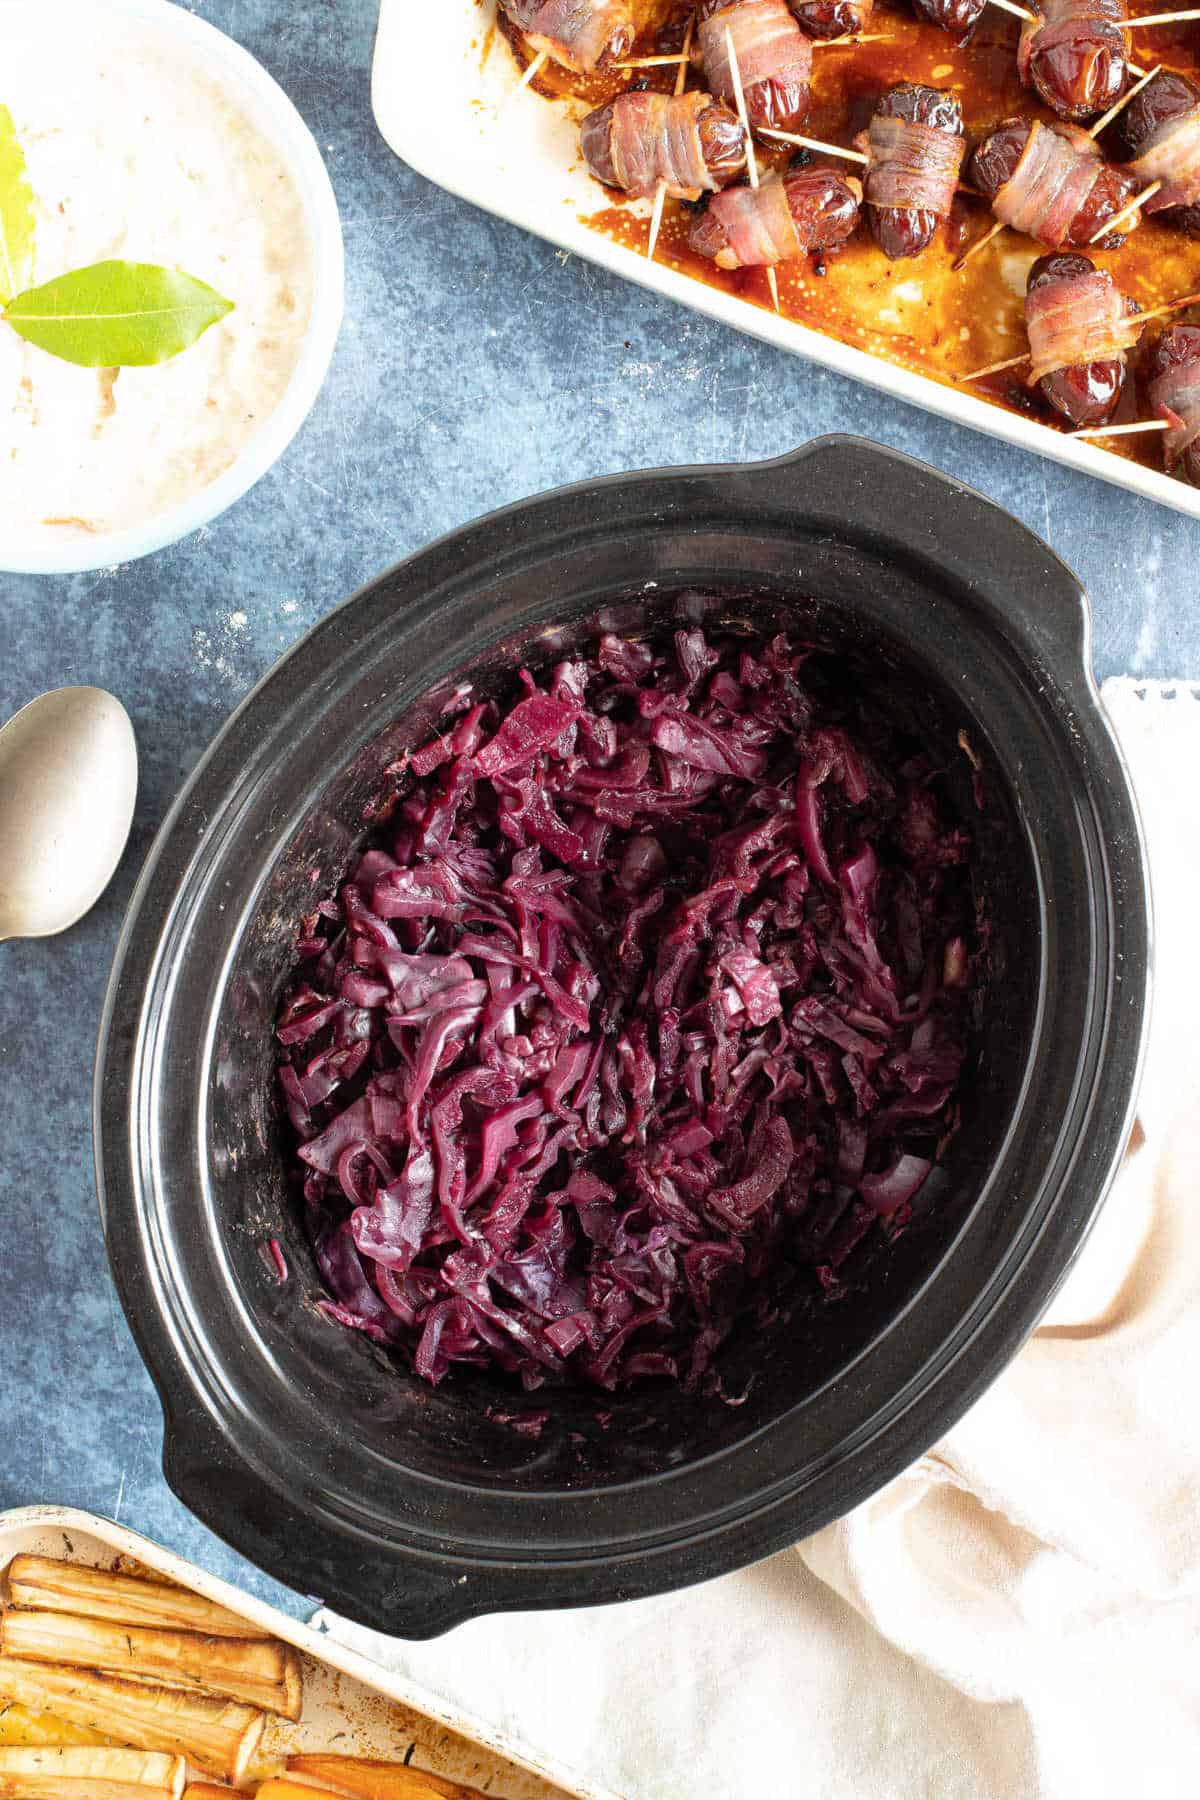 Red cabbage in a slow cooker basin.